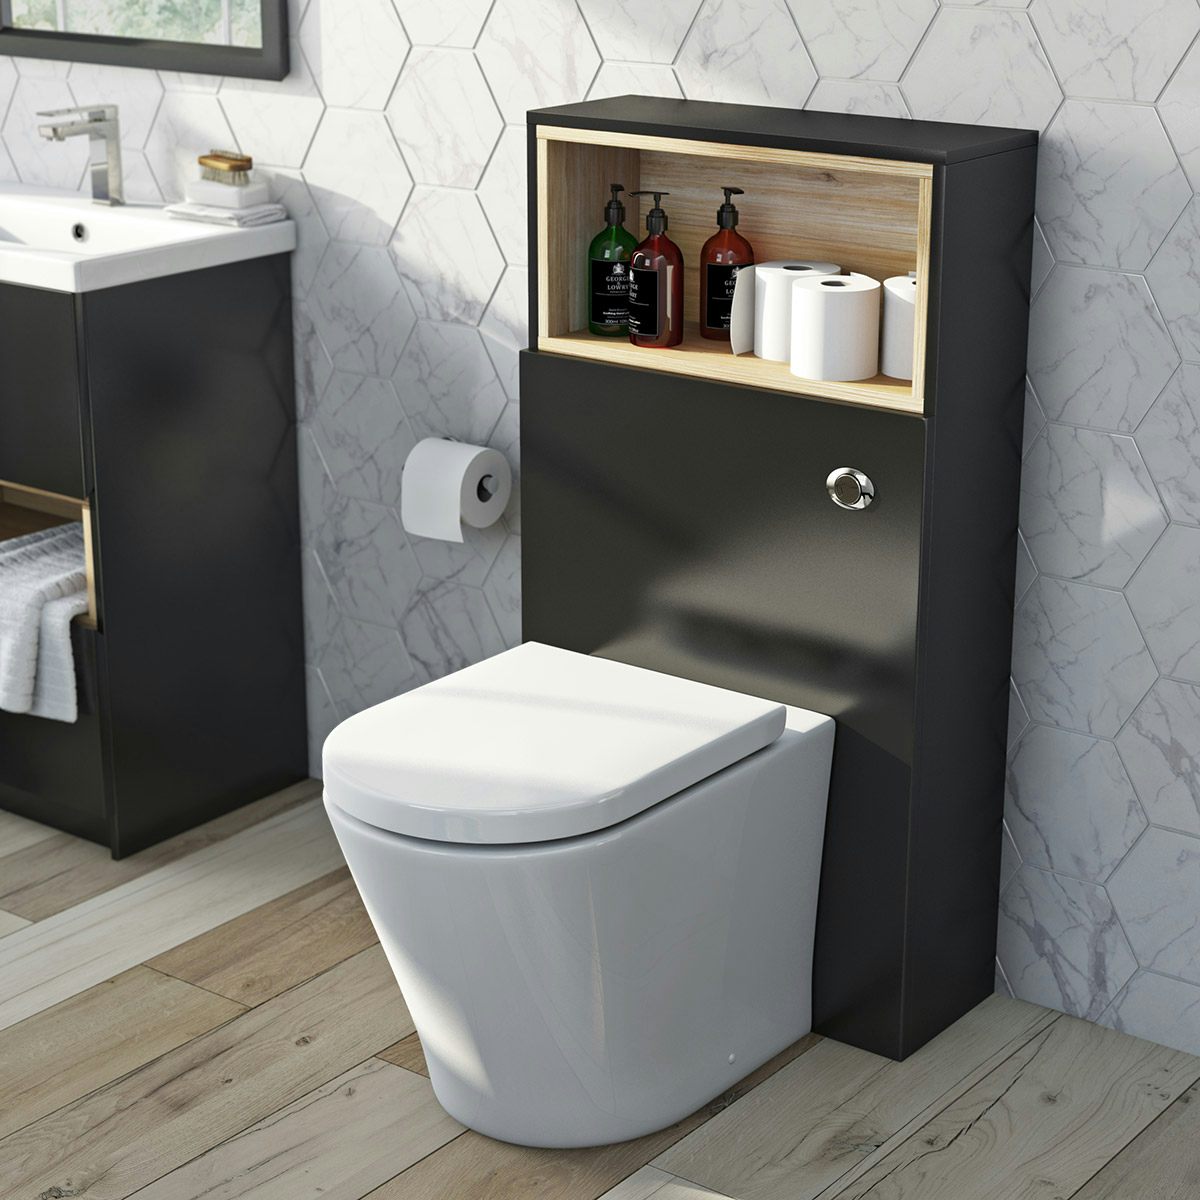 Tate Anthracite Oak back to wall toilet unit